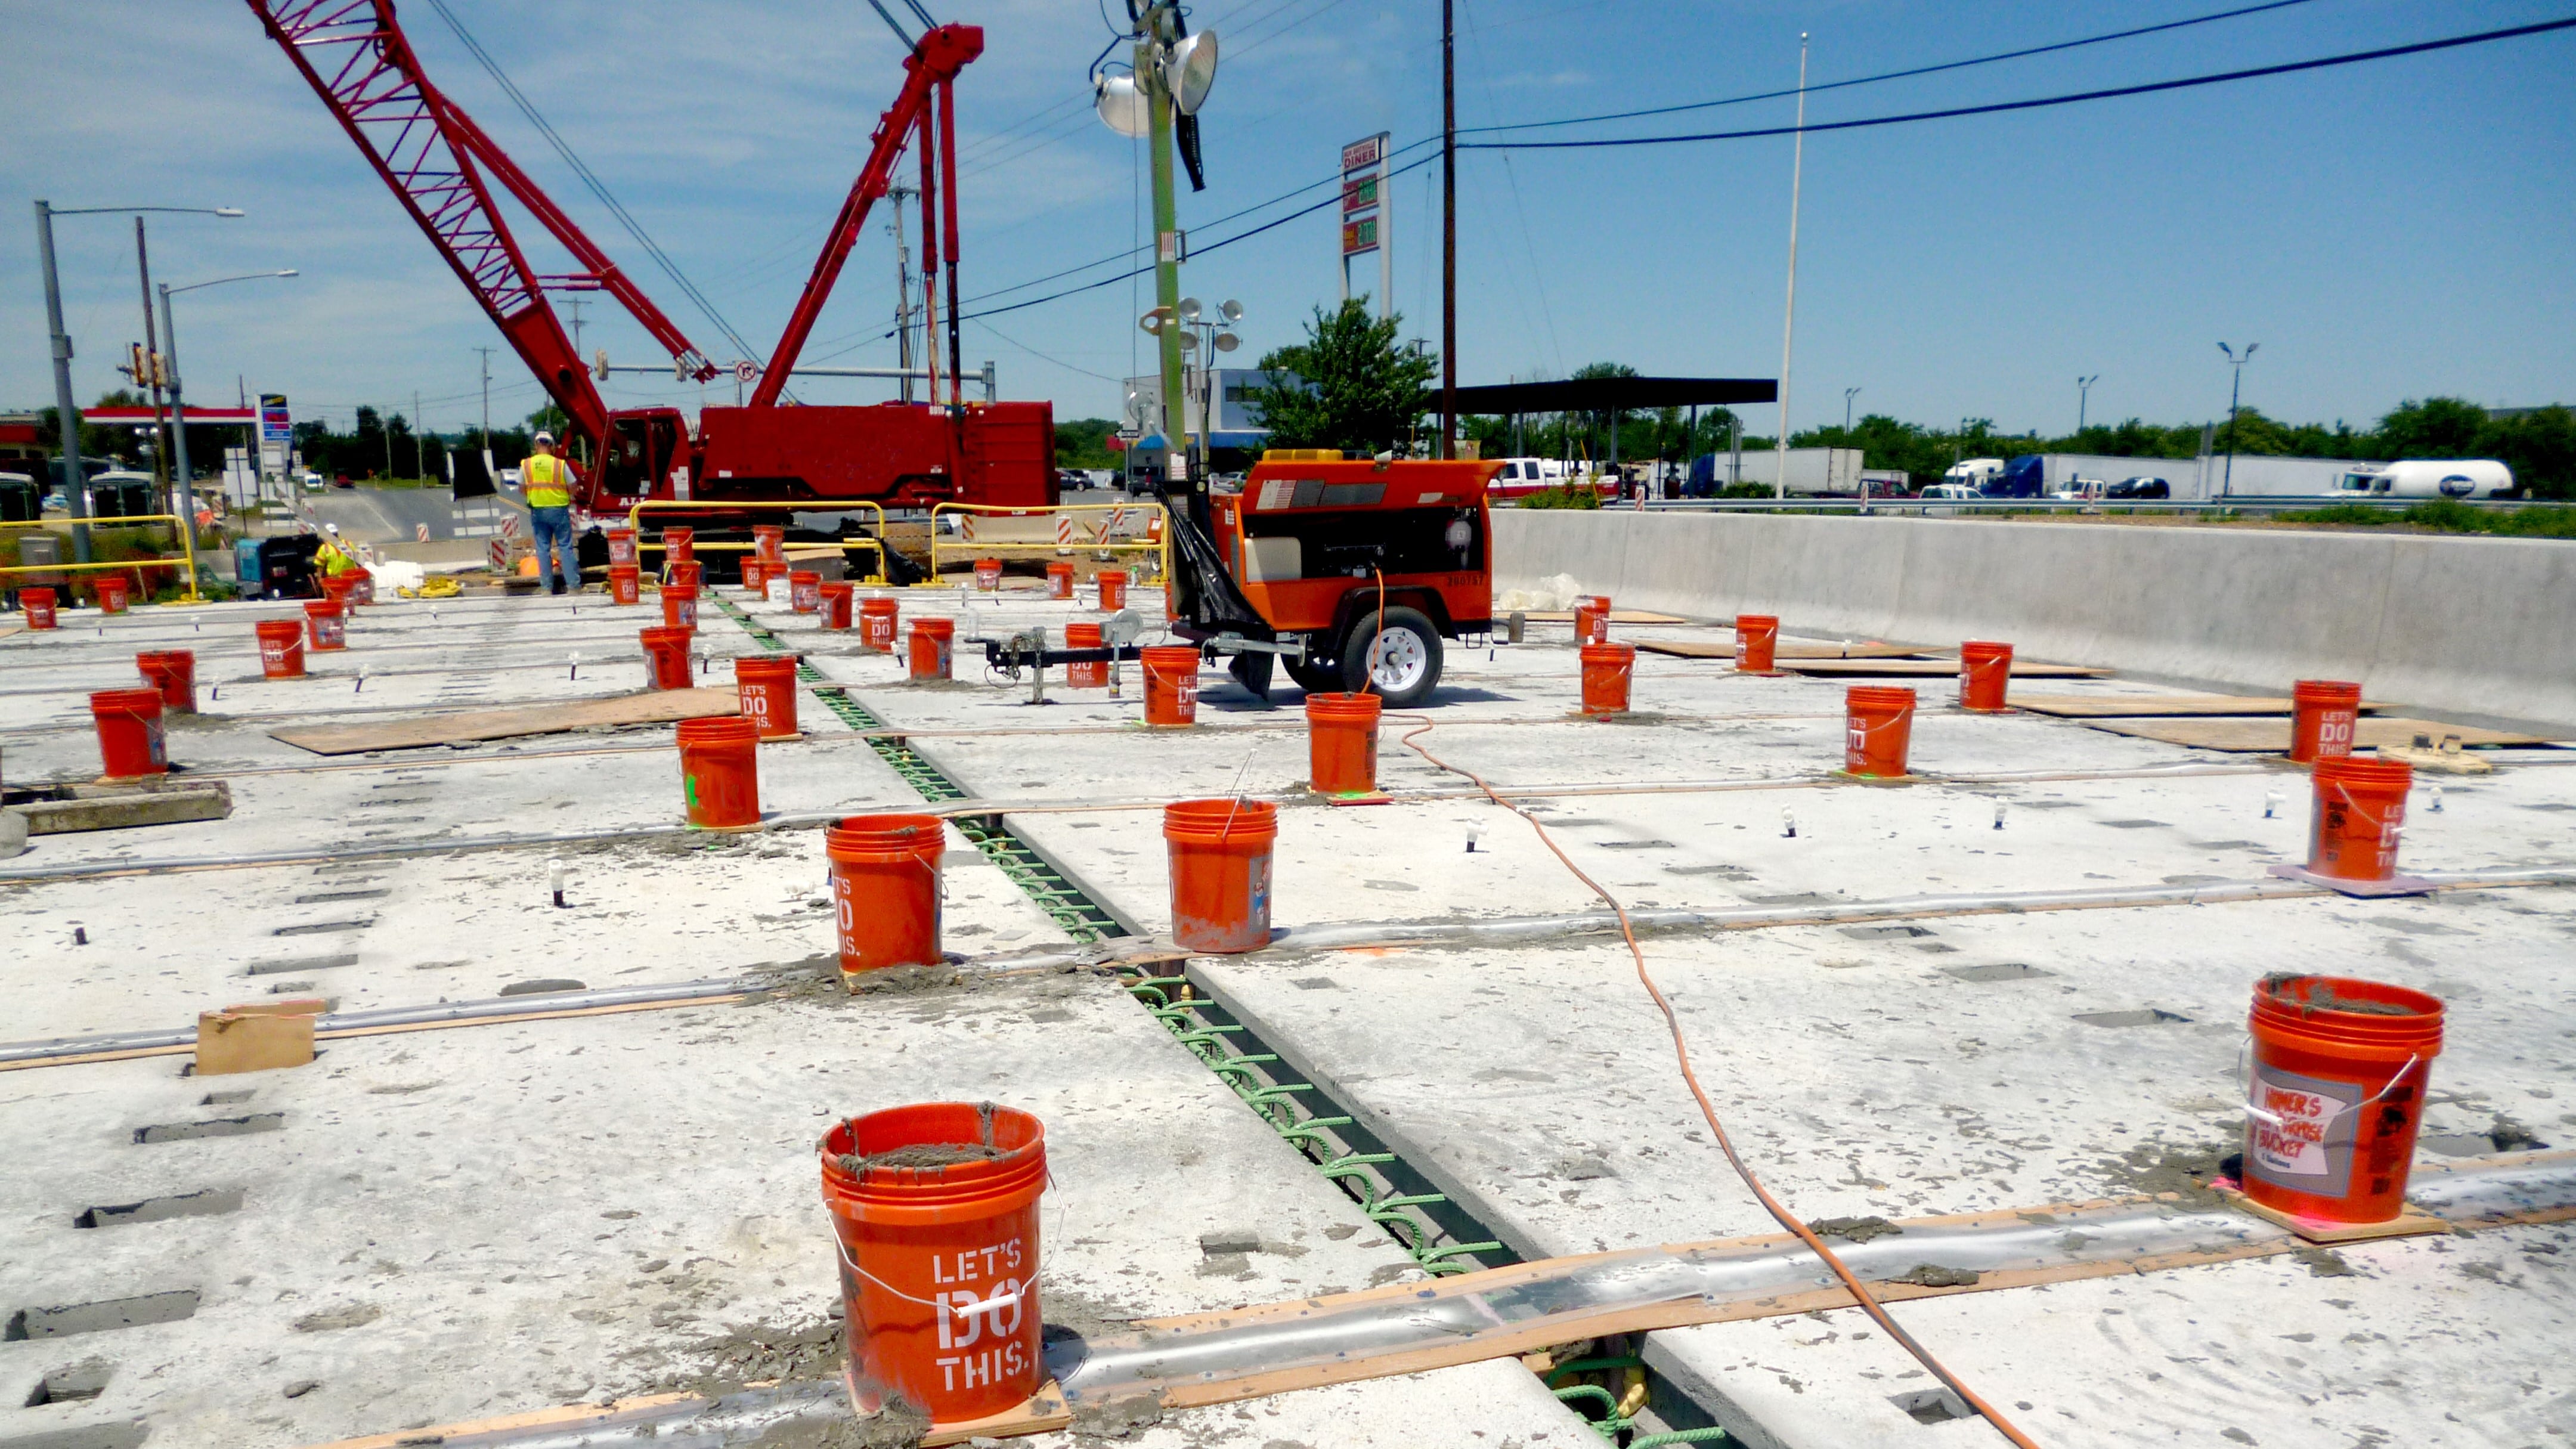 An image of a bridge deck lined with orange buckets in preparation for construction workers to apply Ultra-High Performance Concrete between prefabricated bridge elements